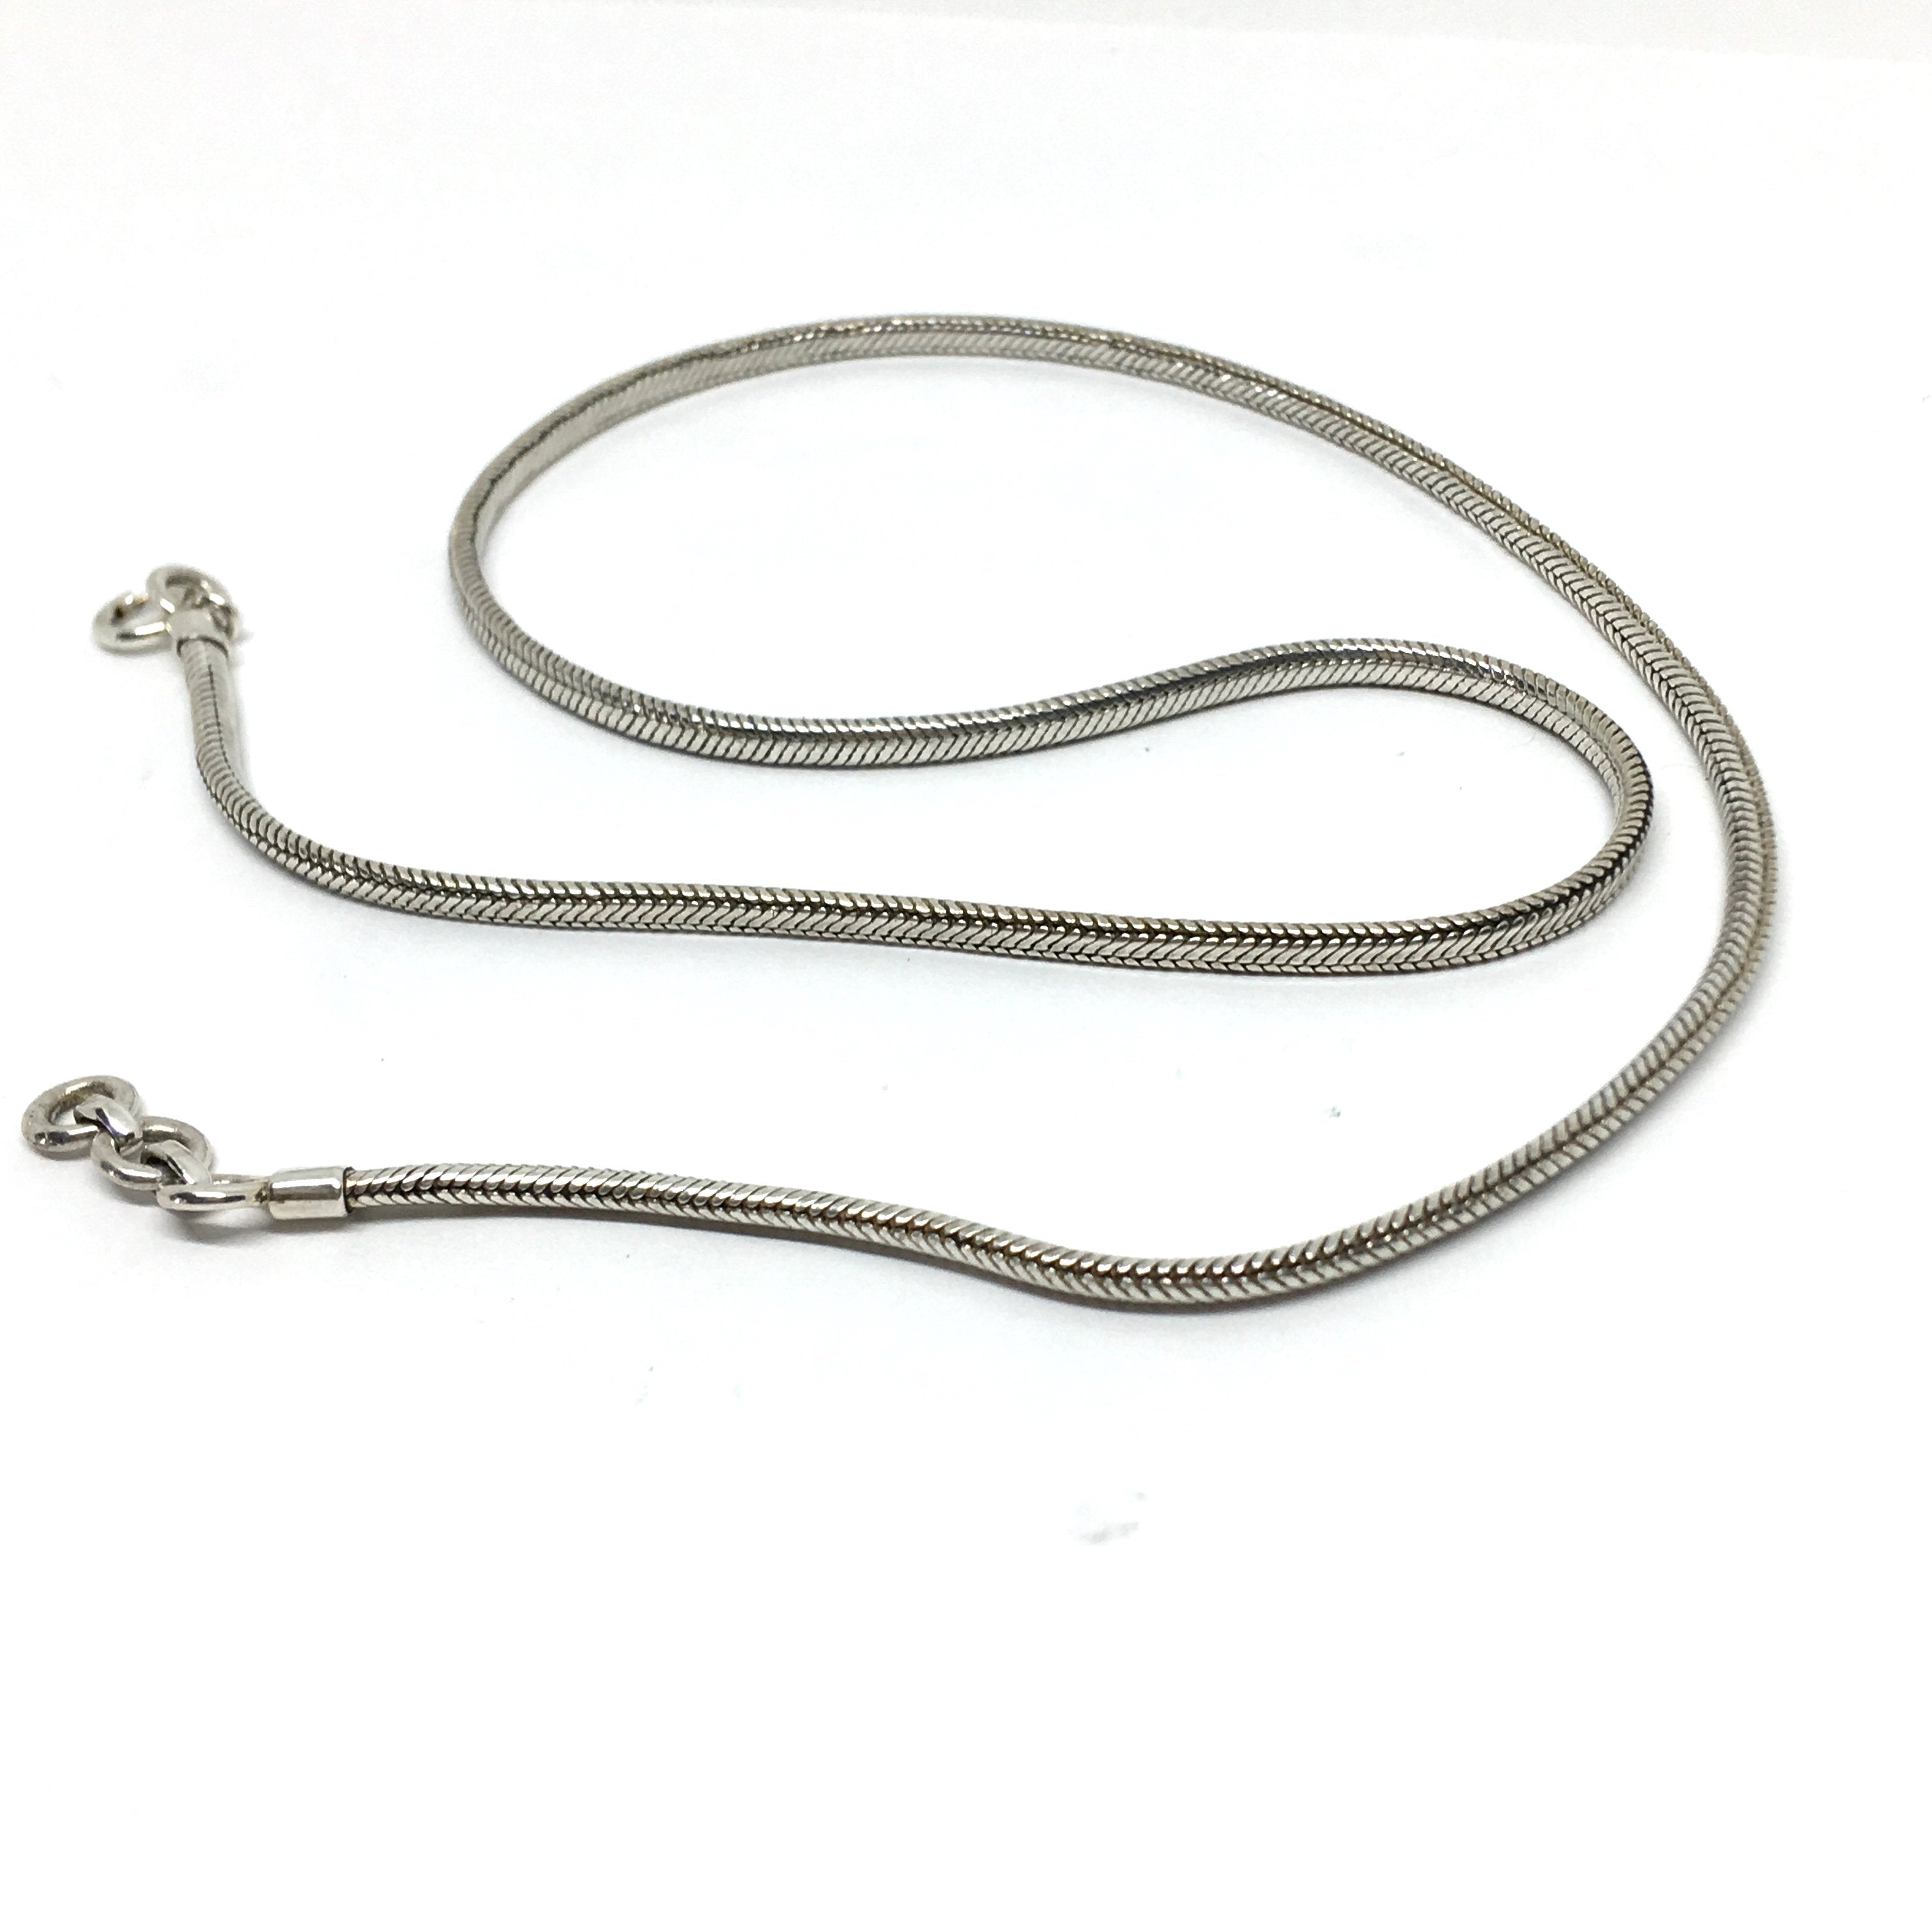 Snake silver chain (32 inch)